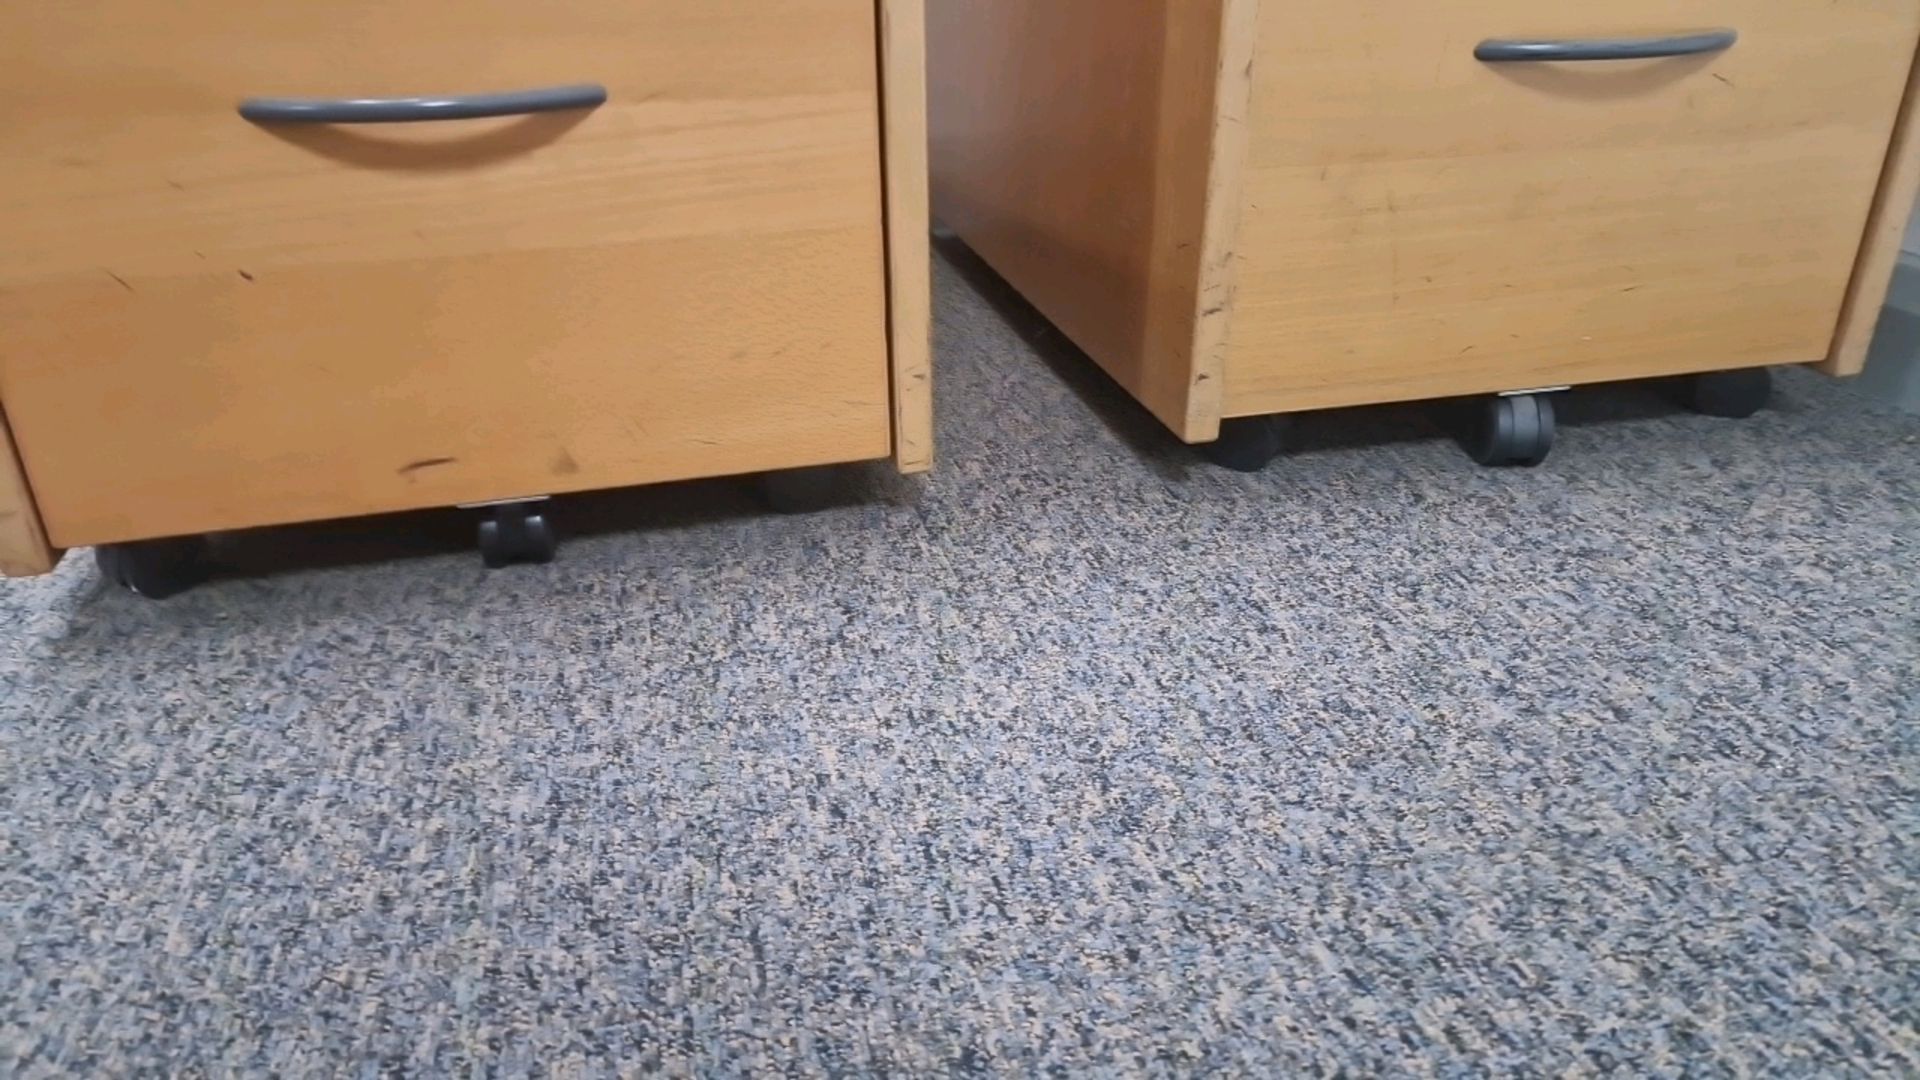 Wooden Under Desk Drawers x2 - Image 2 of 4